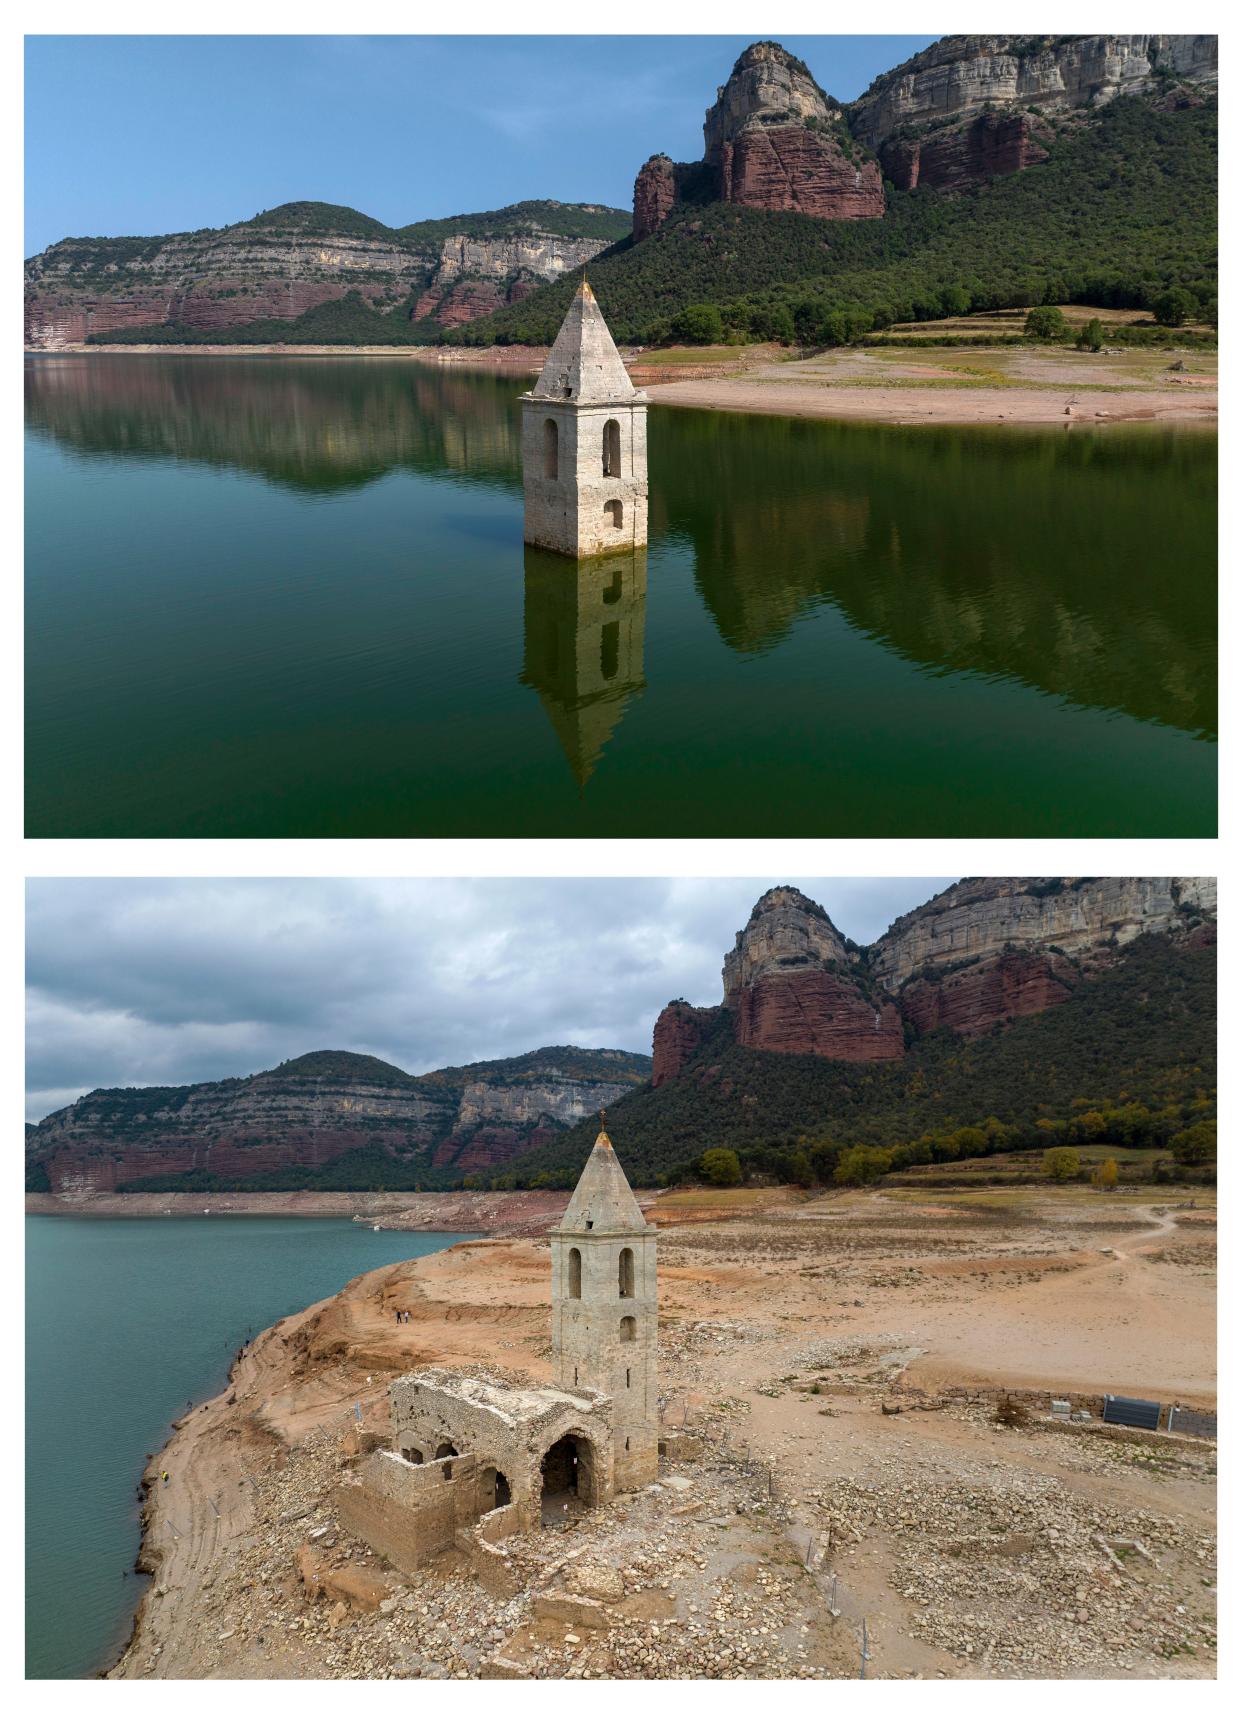 This combo of images shows from the top, an 11th century Romanesque church partially exposed in a reservoir in Vilanova de Sau, Catalonia, Spain, on Monday, June 20, 2022, and the same spot on Friday, November 18, 2022.